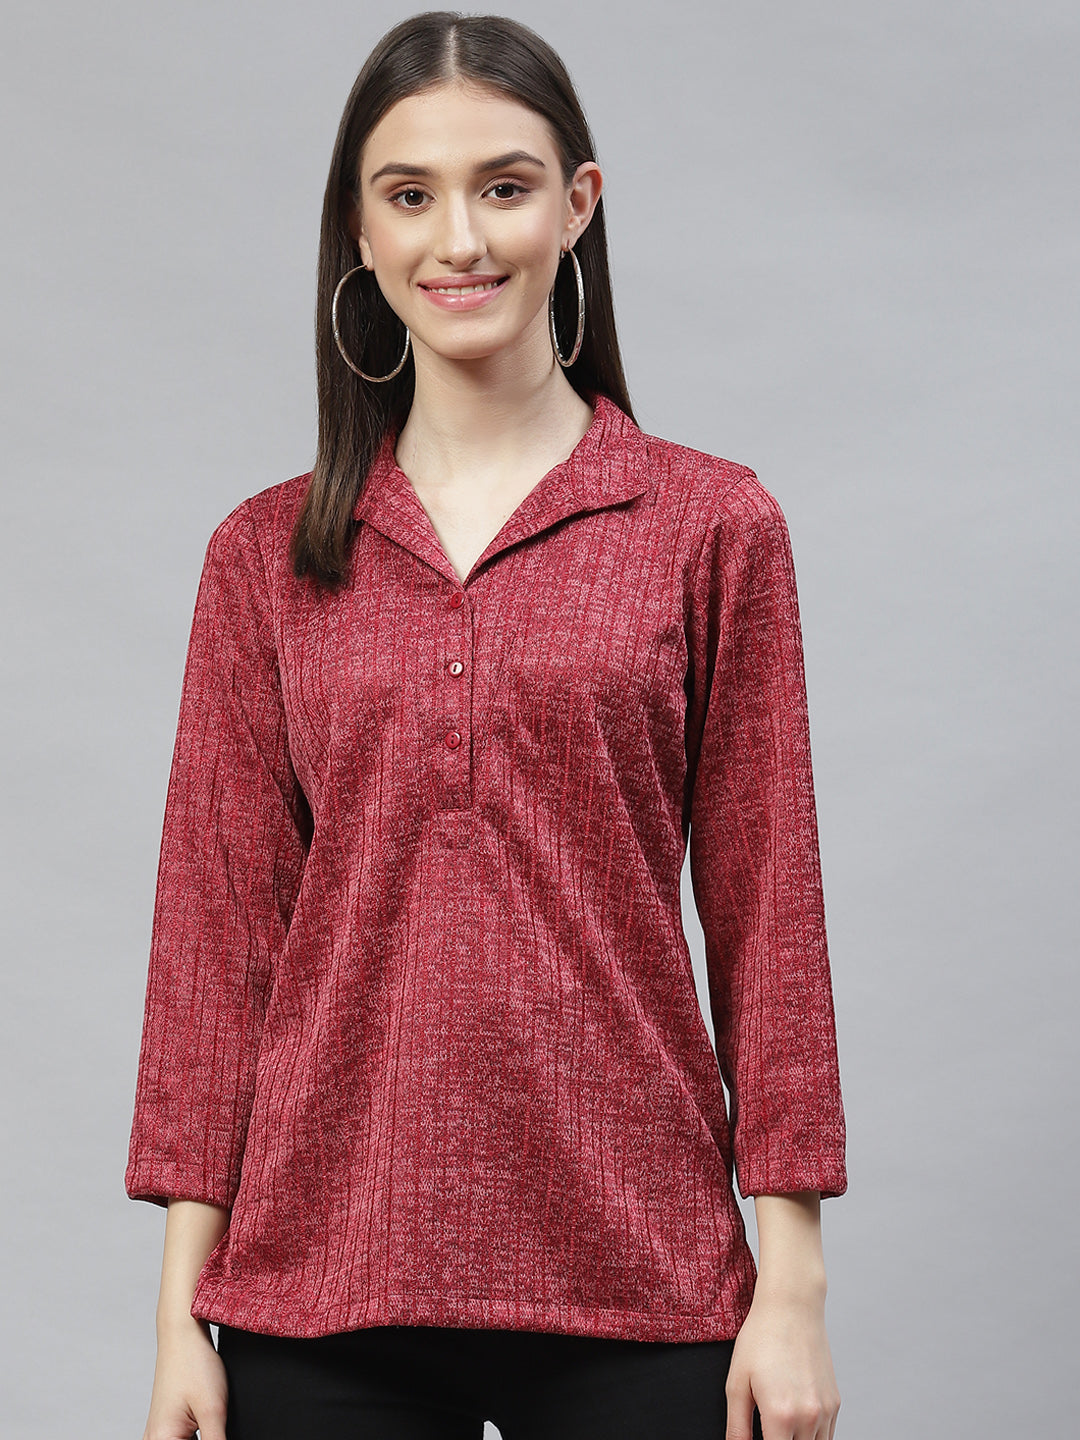 Collerd Red Casual Top